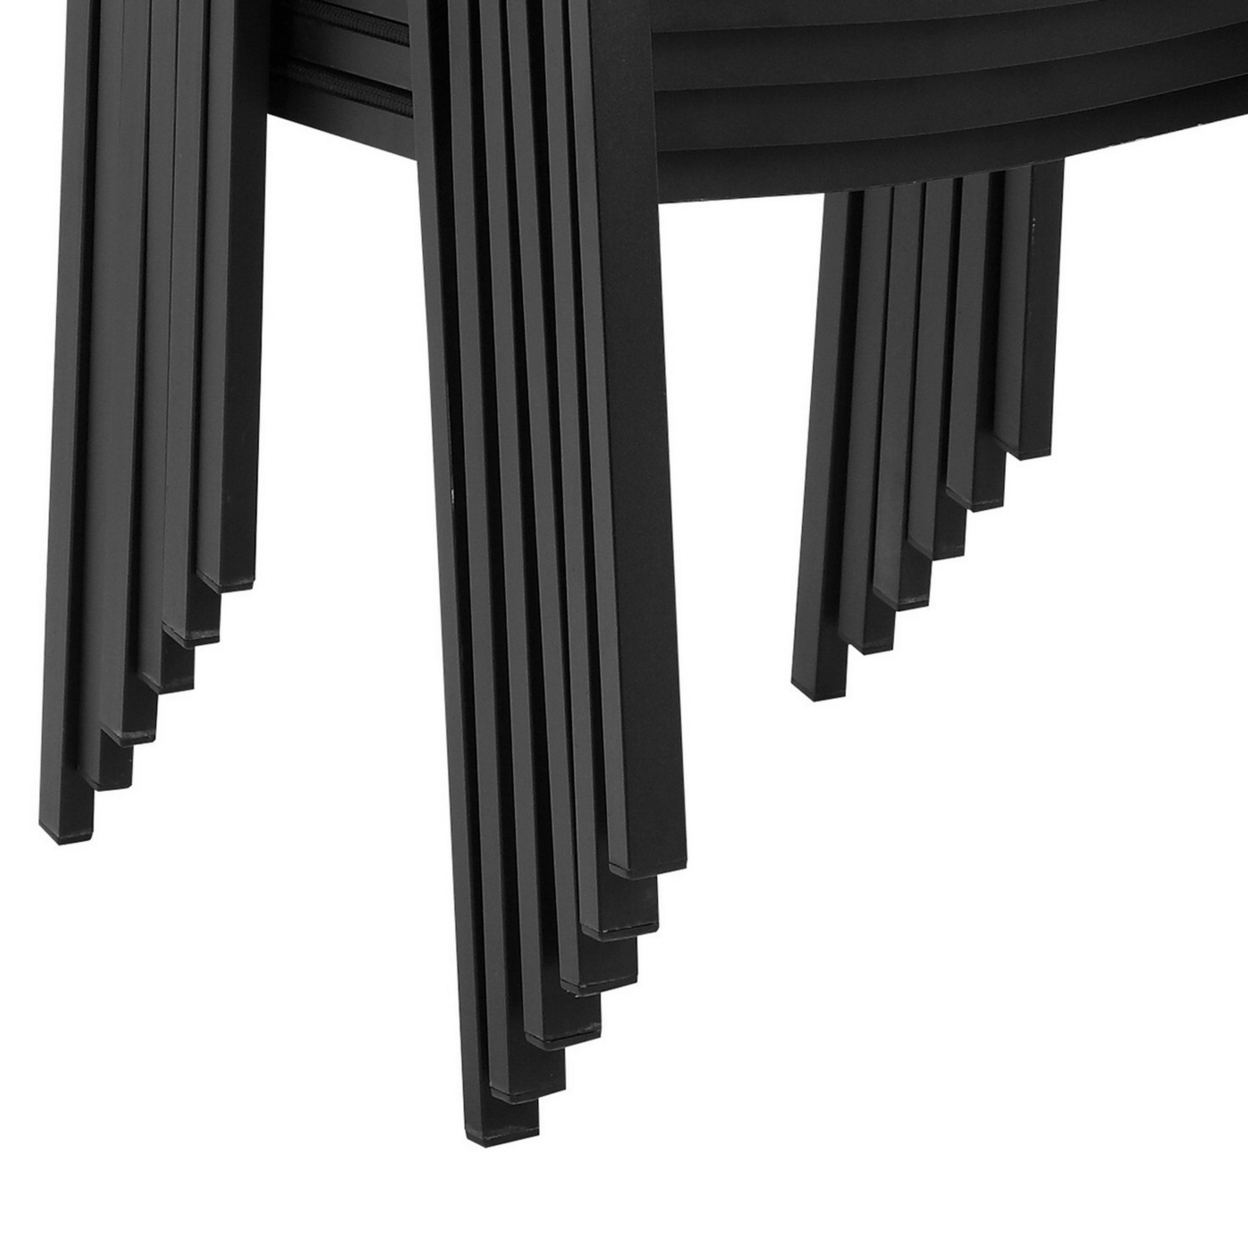 Fifi 21 Inch Set of 6 Dining Chairs, Black Aluminum Frame, Easily Stackable- Saltoro Sherpi - image 4 of 5